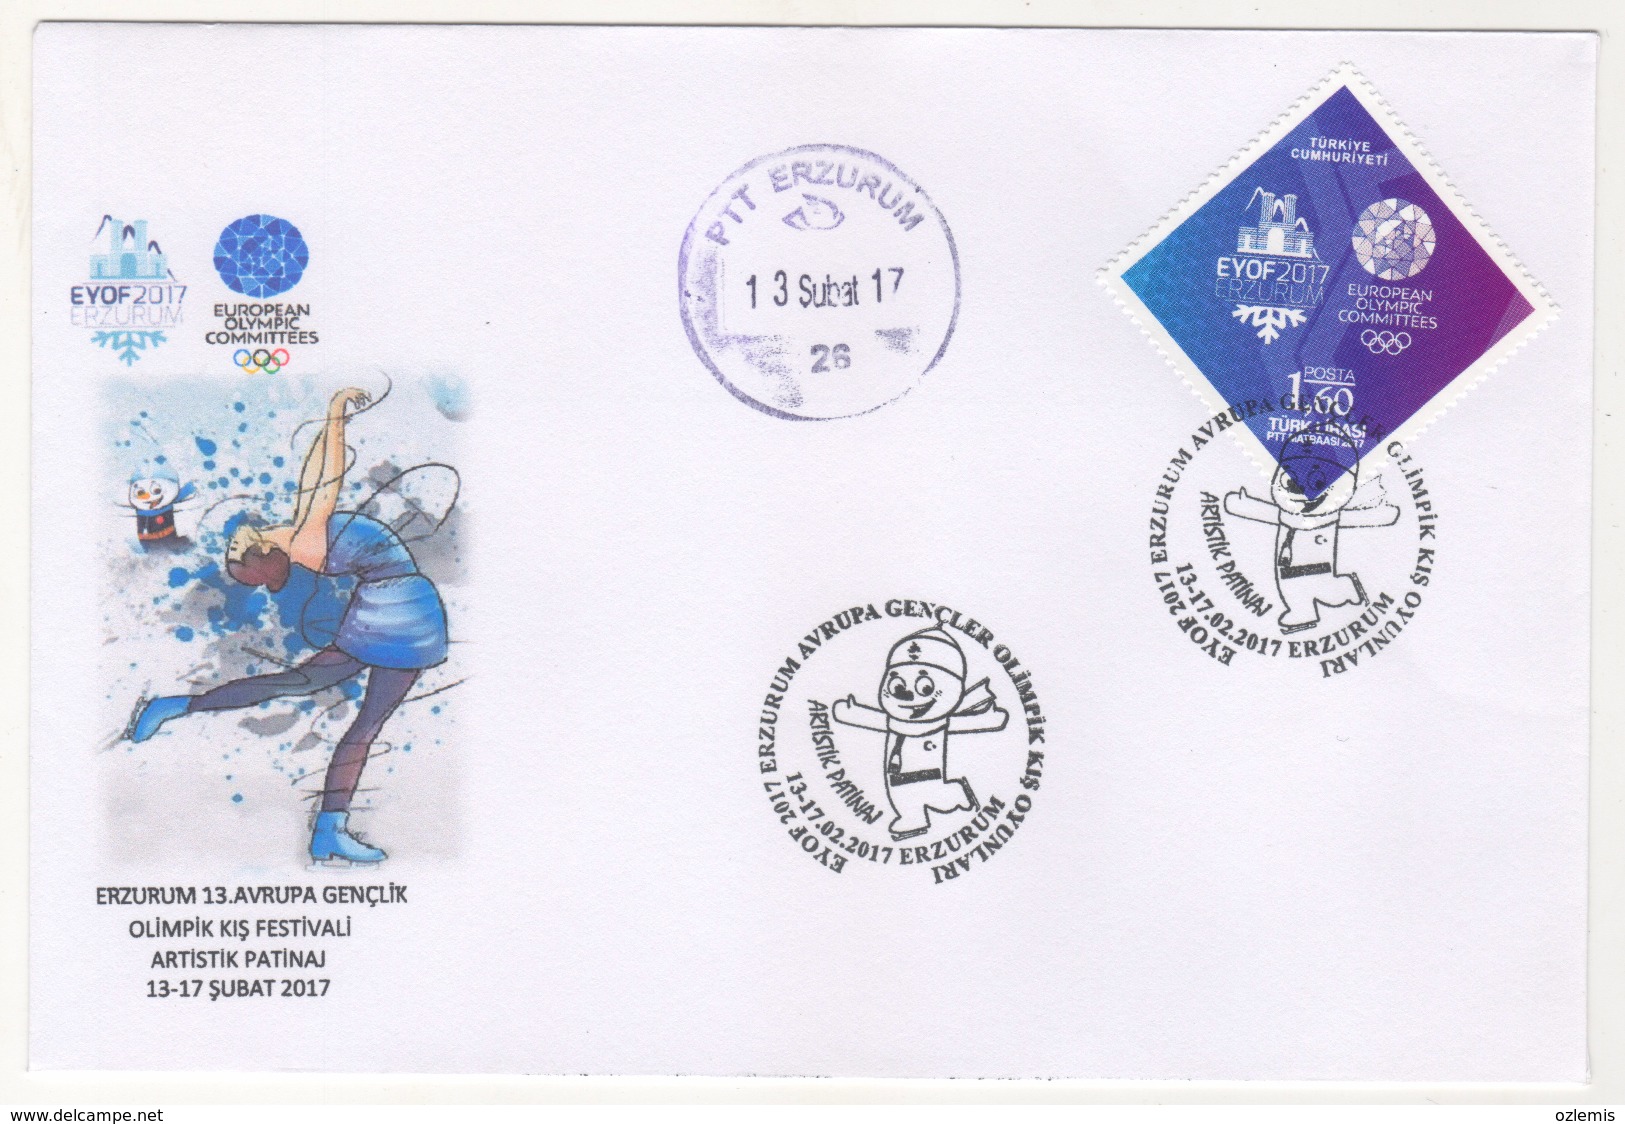 EYOF 2017 ERZURUM EUROPEAN YOUTH OLYMPIC WINTER FESTIVAL FIRST DAY  COVER - Covers & Documents